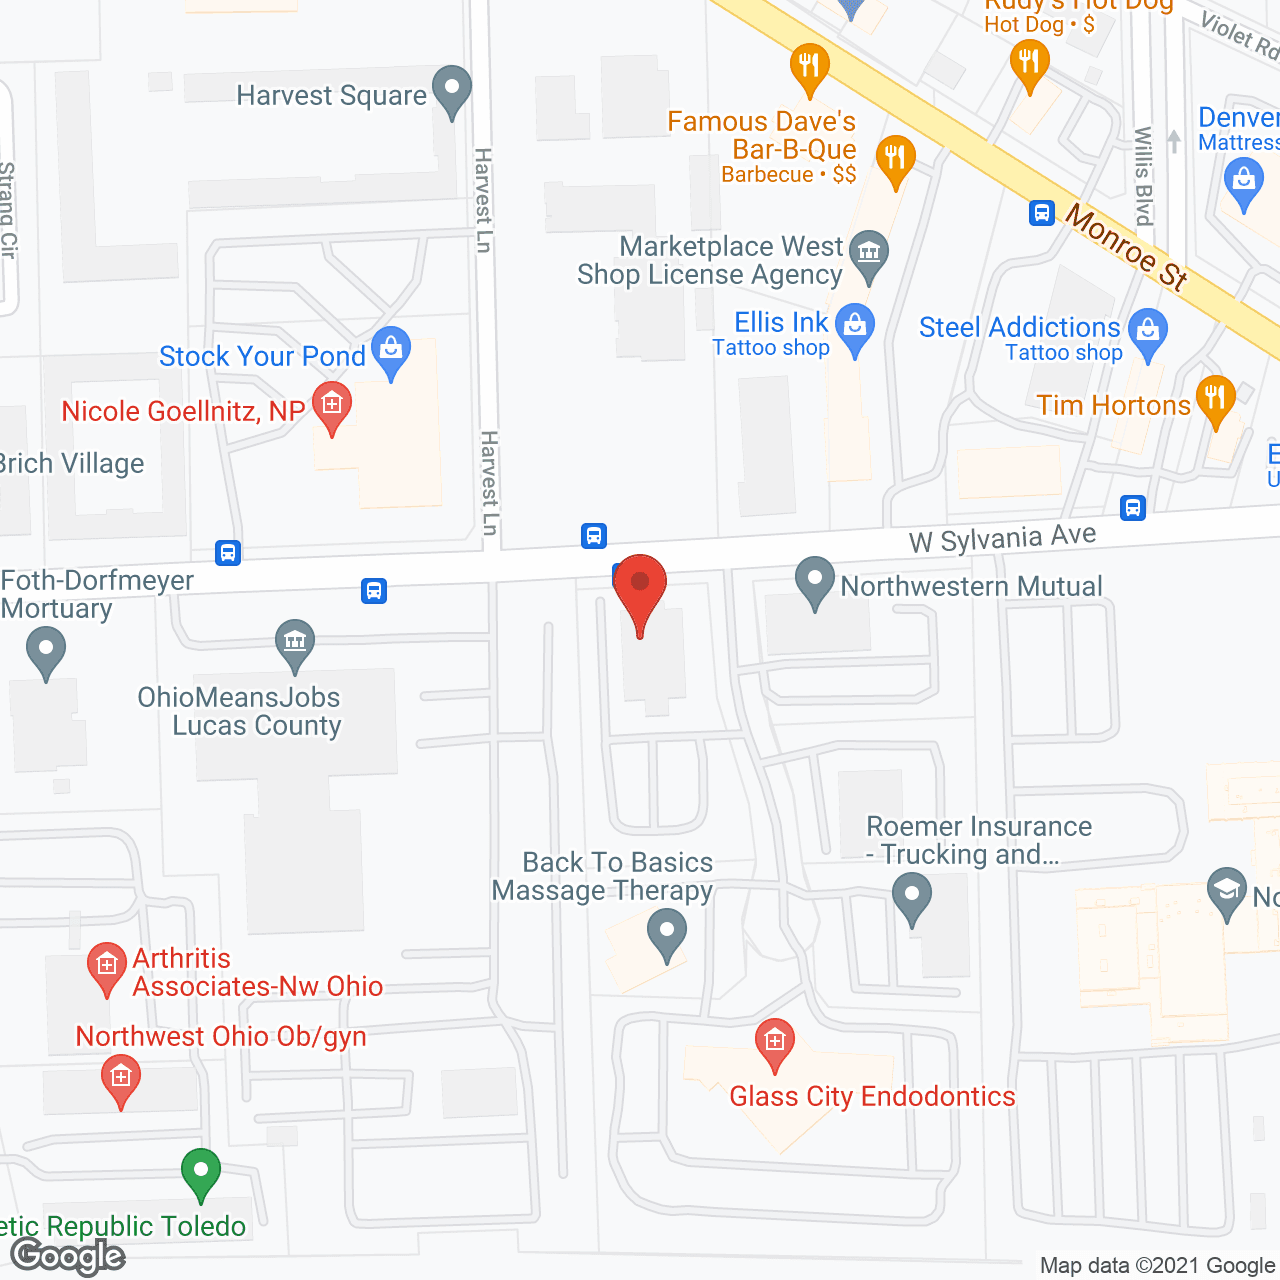 United Rehab & Management Svc in google map